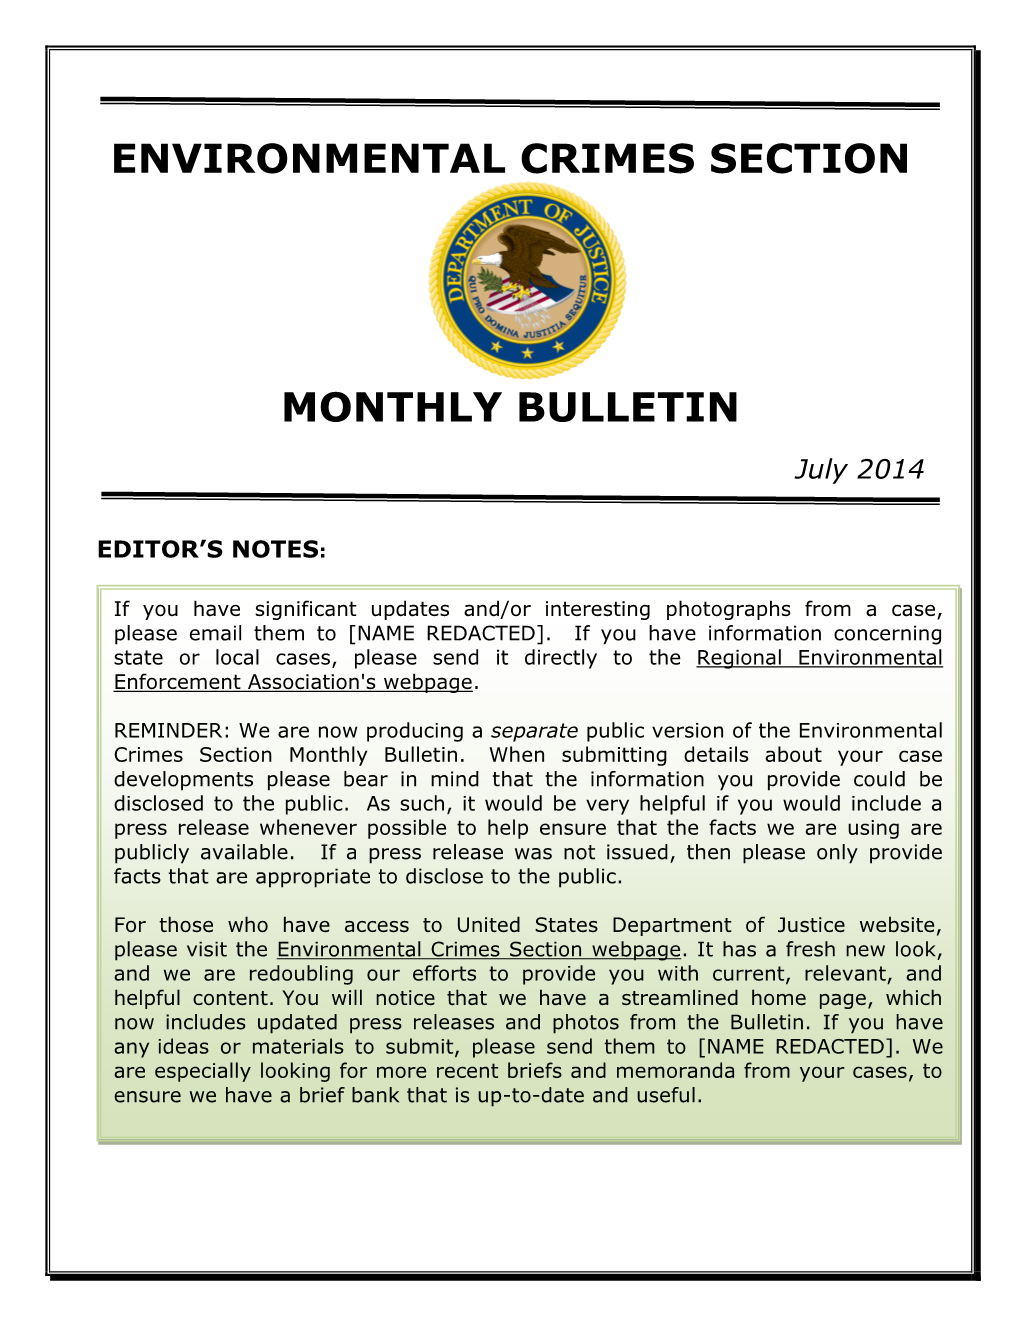 Environmental Crimes Section Monthly Bulletin July 2014